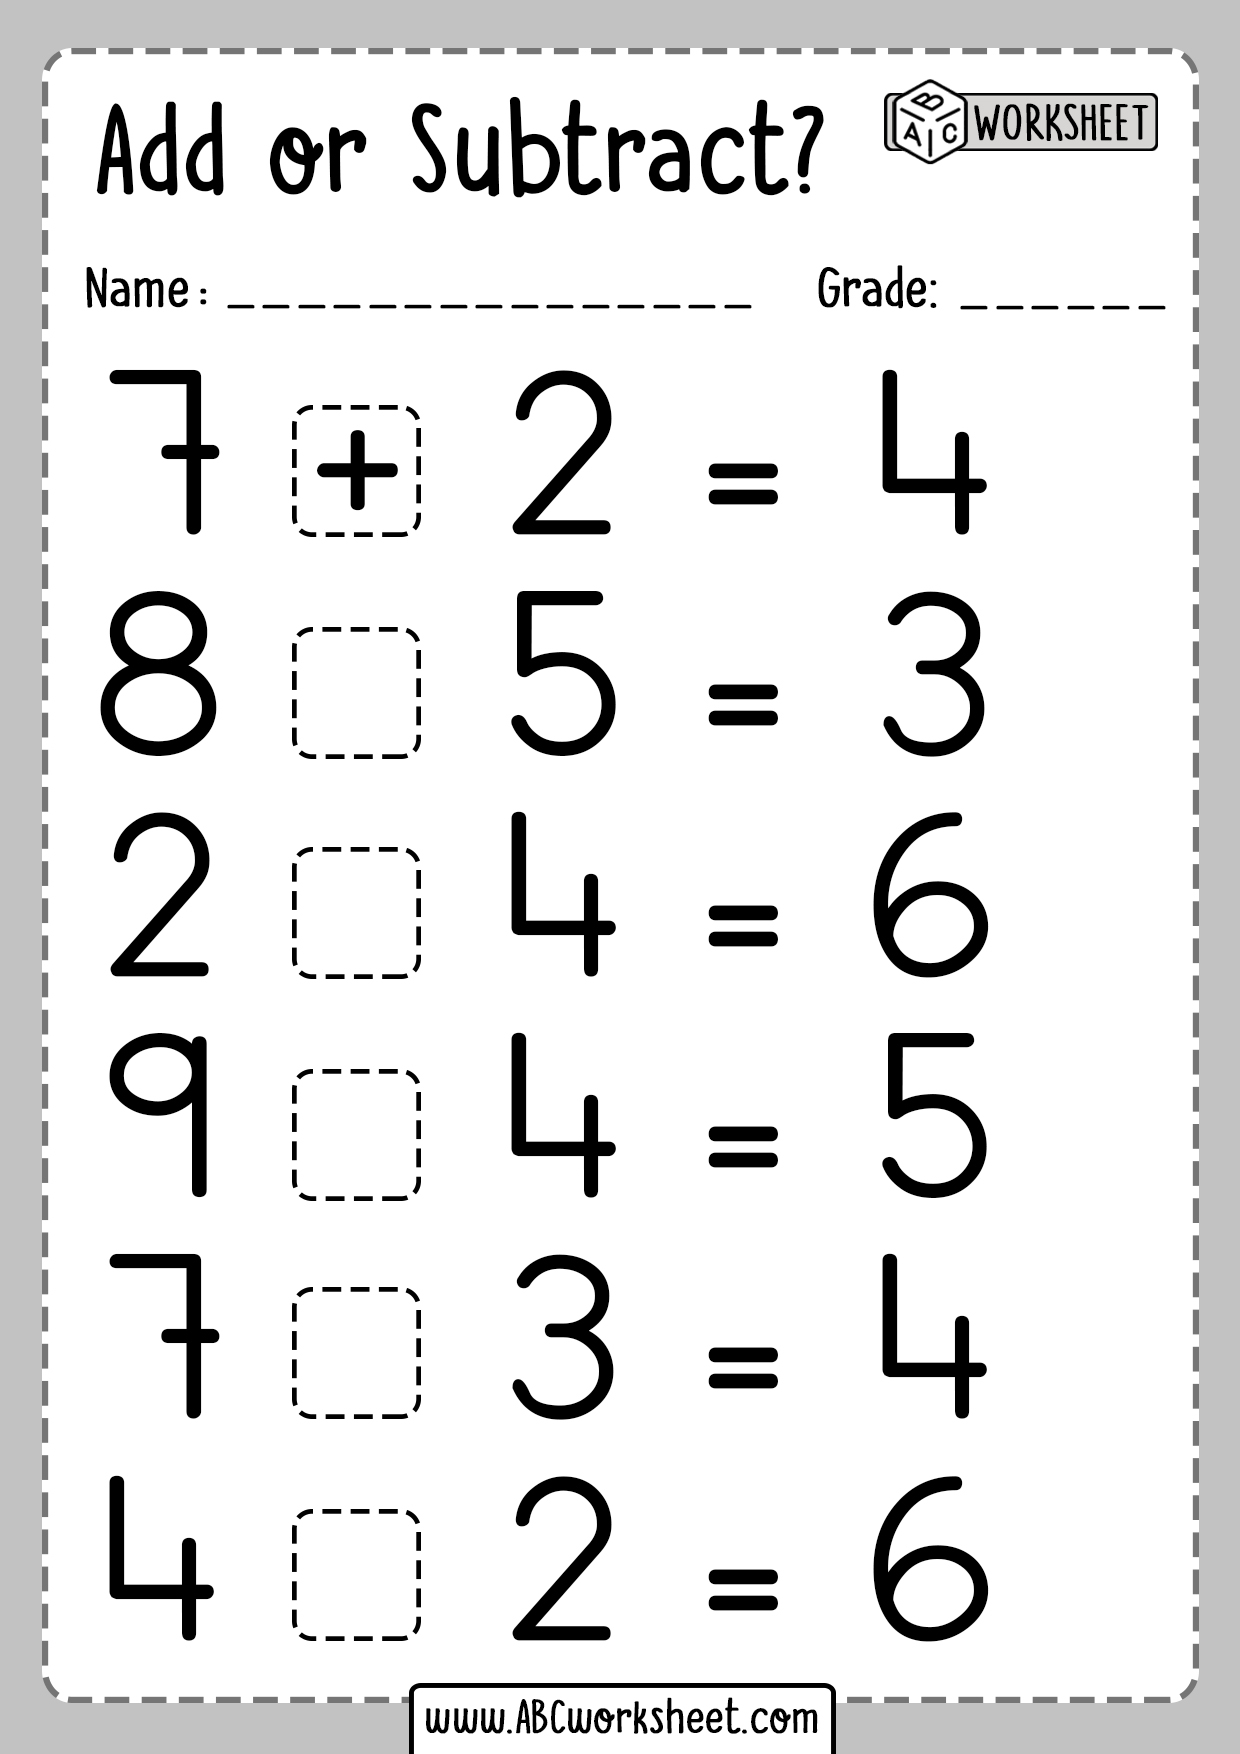 printable-addition-worksheets-5th-grade-large-print-subtracting-3